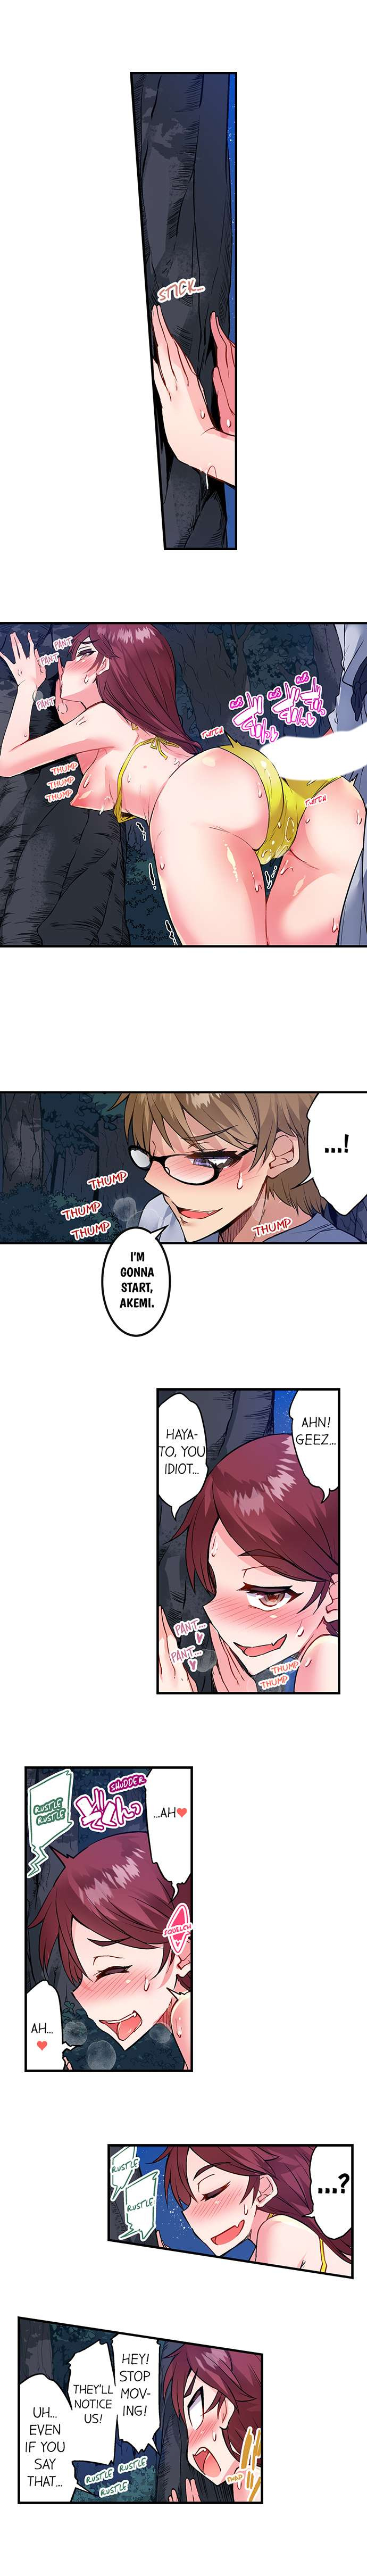 Traditional Job of Washing Girls’ Body - Chapter 154 Page 8